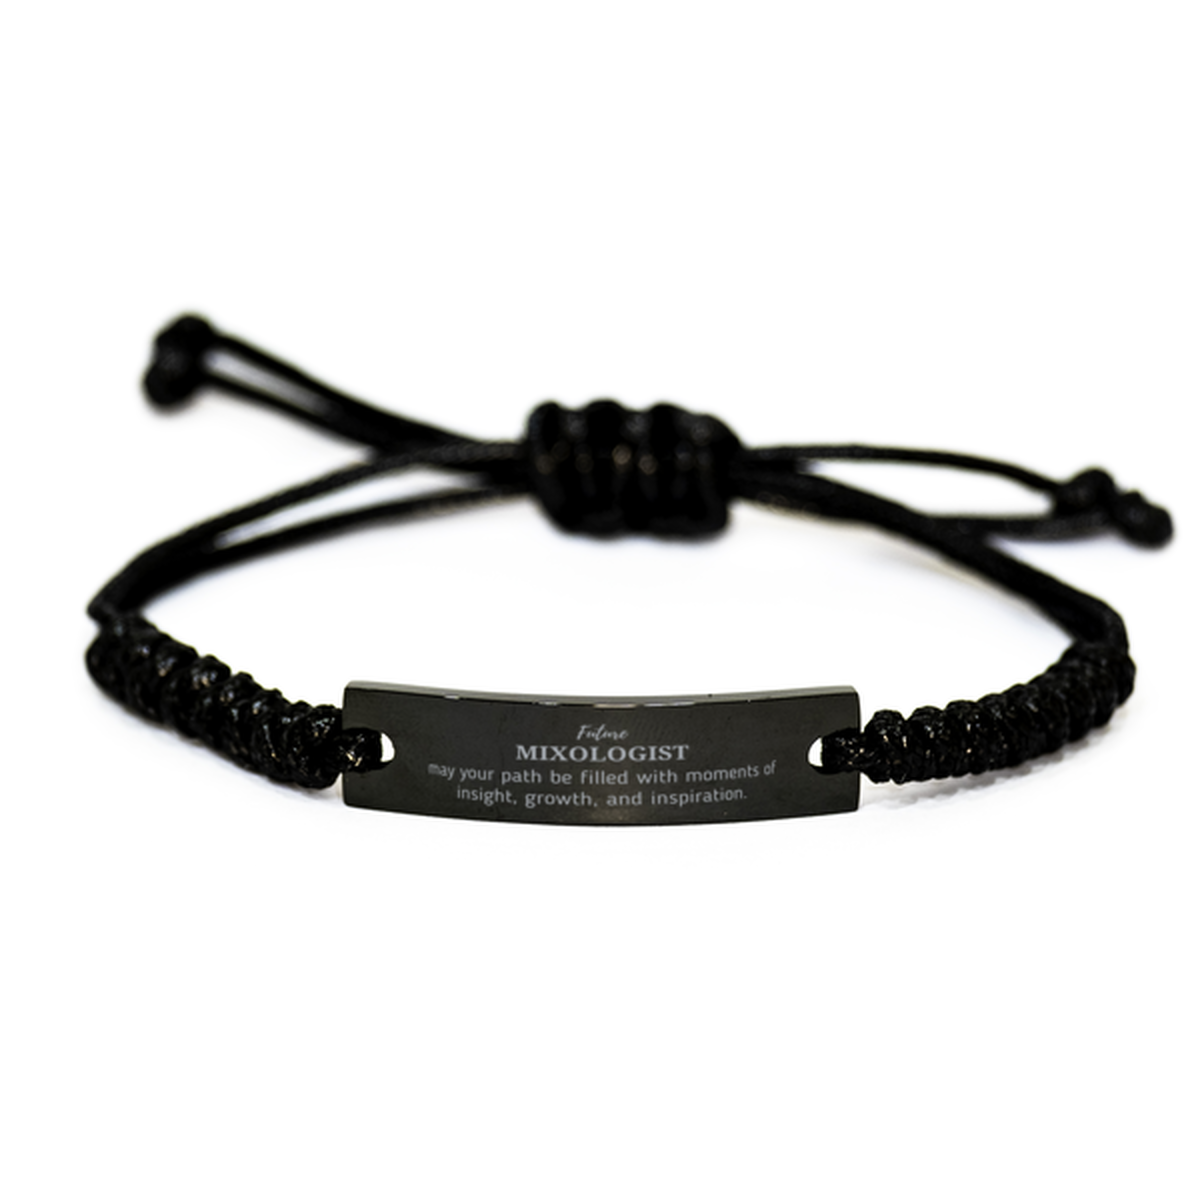 Future Mixologist Gifts, May your path be filled with moments of insight, Graduation Gifts for New Mixologist, Christmas Unique Black Rope Bracelet For Men, Women, Friends